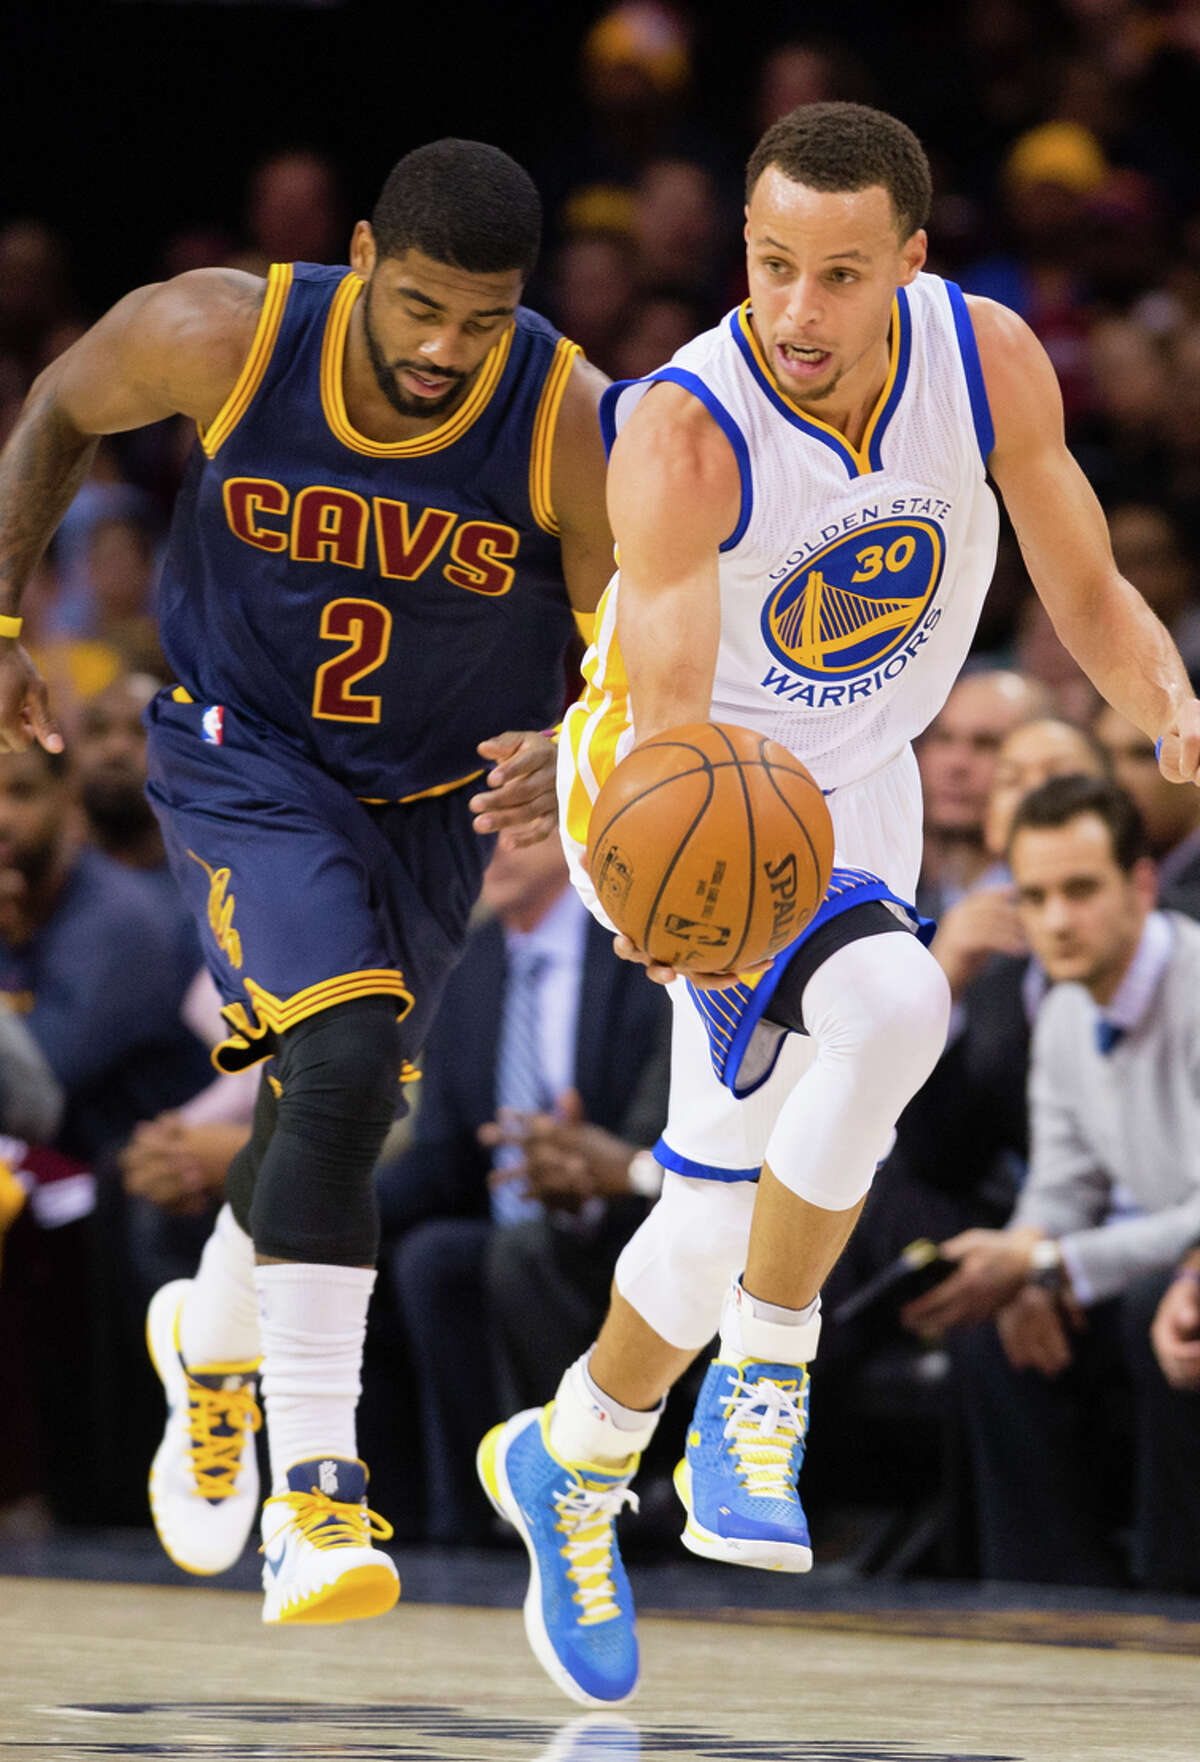 Stephen Curry (right), pursued by fellow All-Star Kyrie Irving, had 18 points on 5-of-17 shooting.